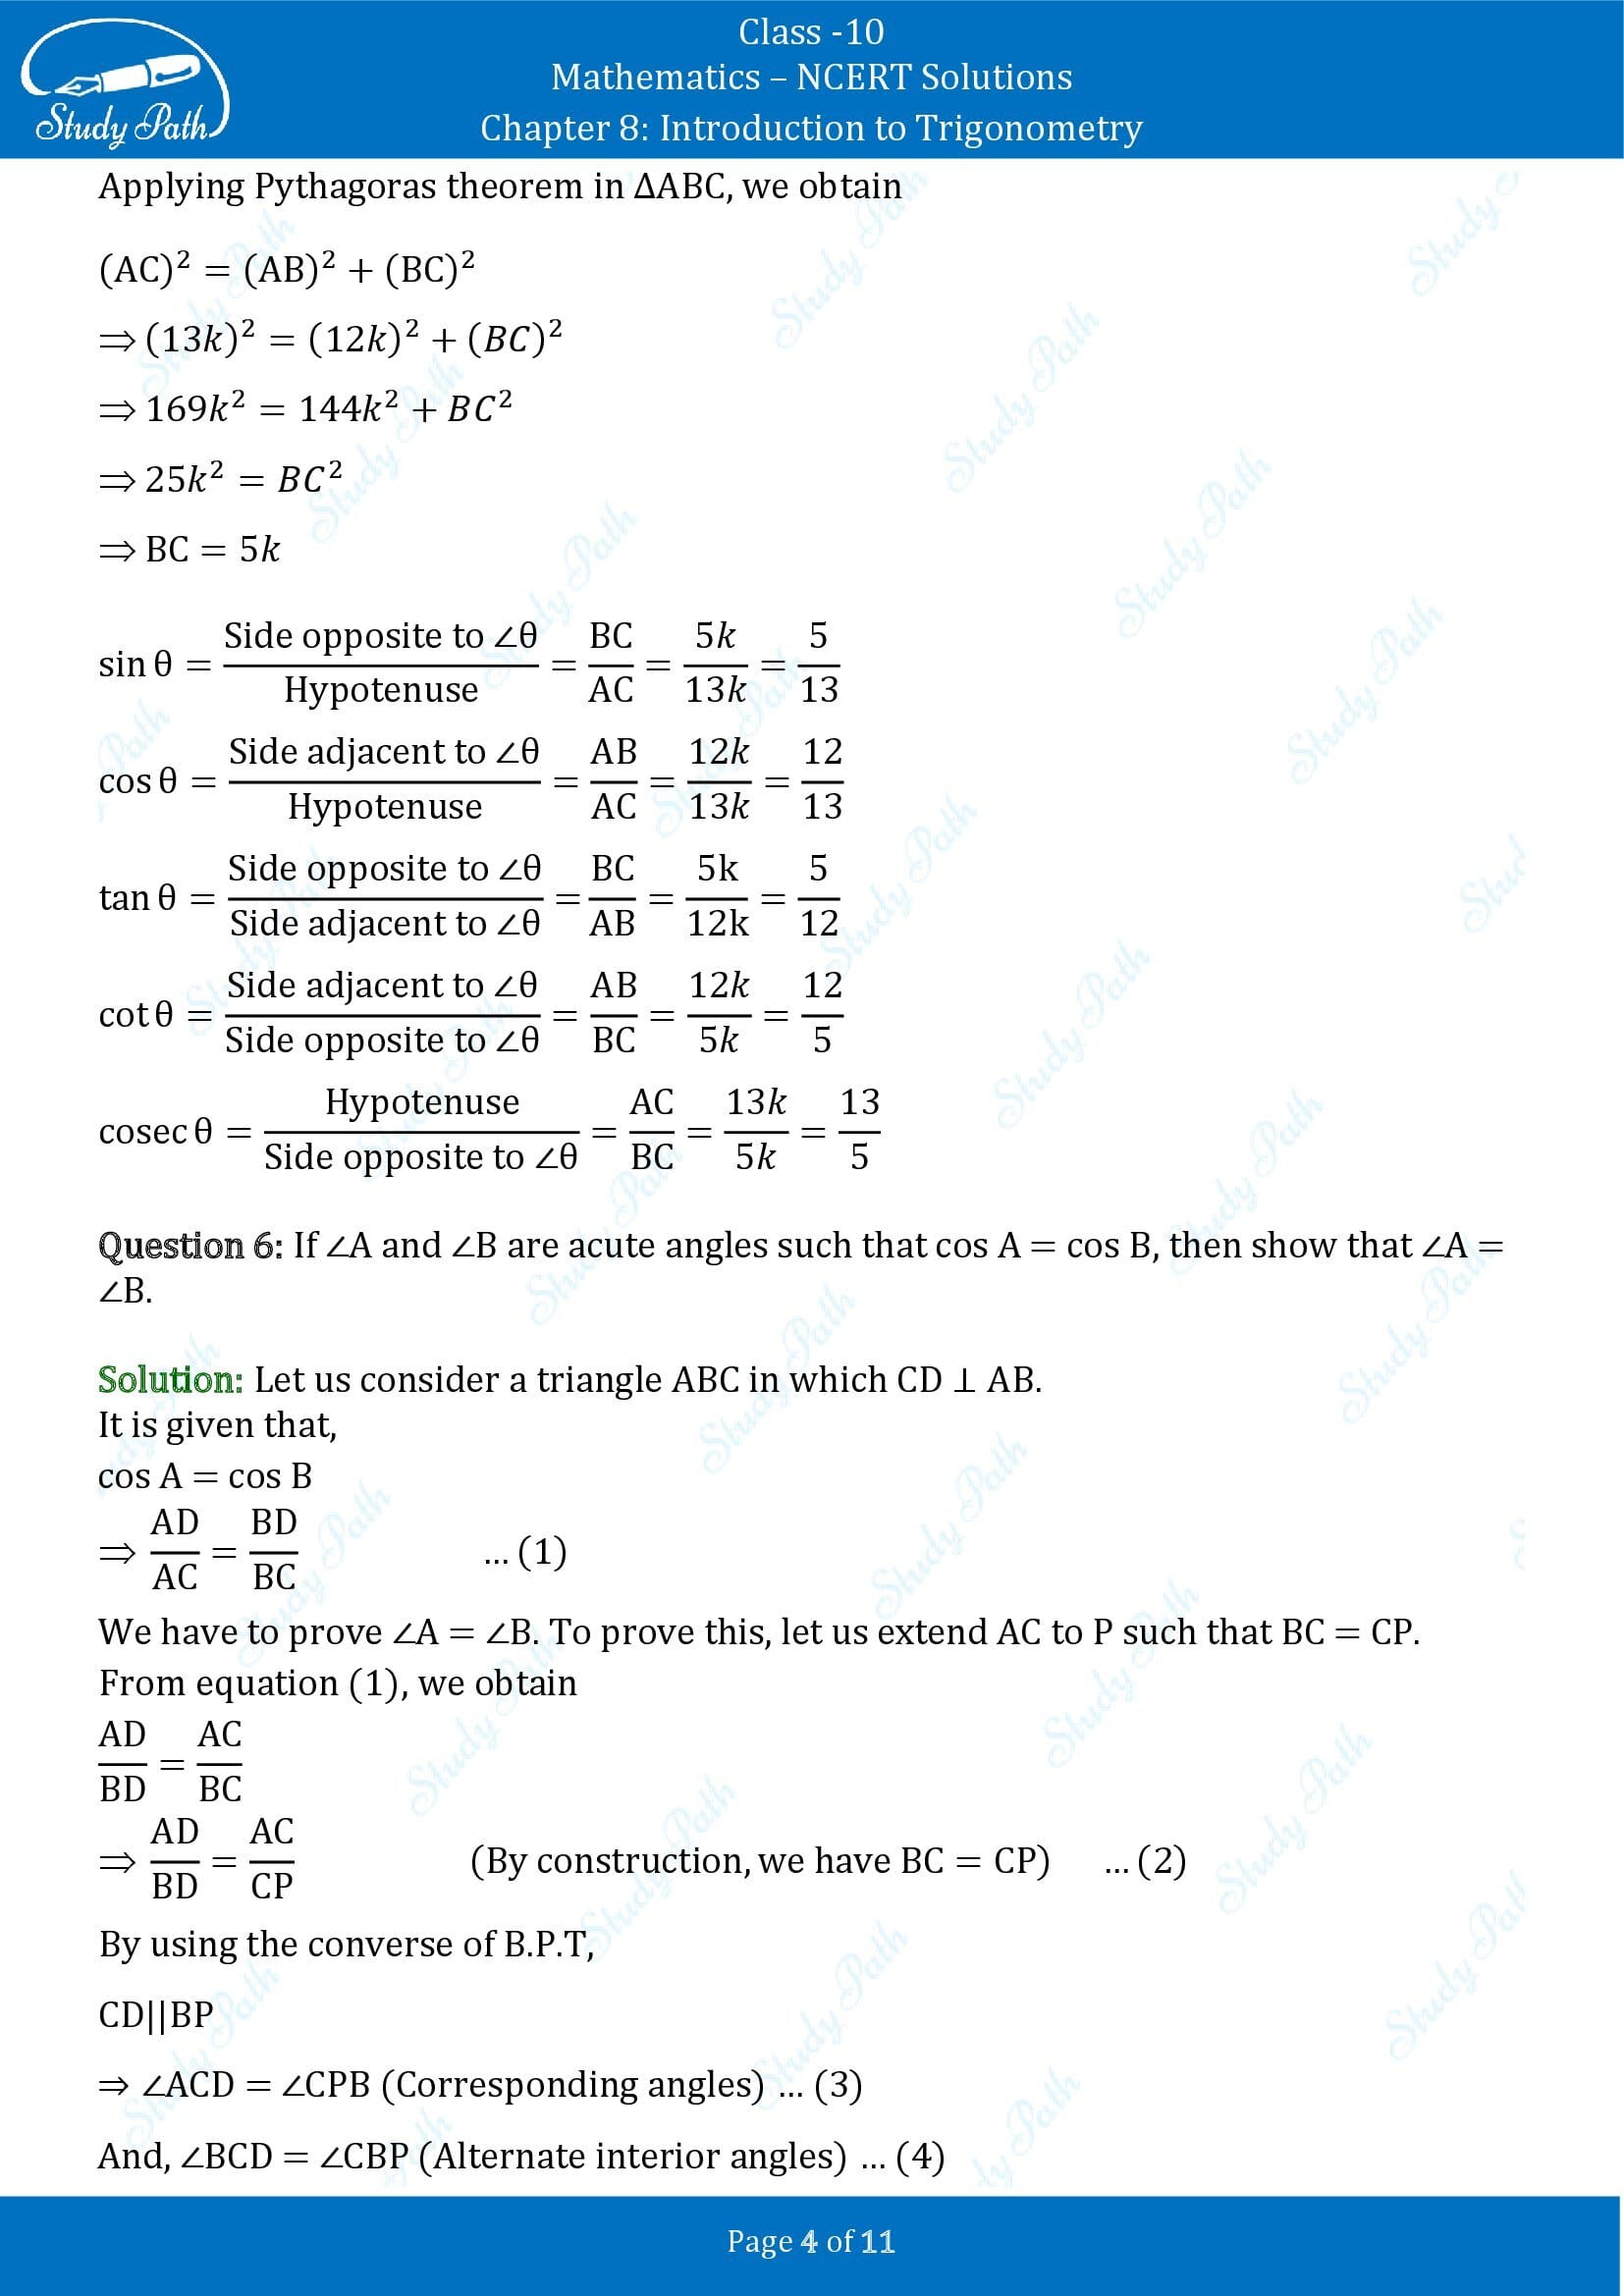 NCERT Solutions for Class 10 Maths Chapter 8 Introduction to Trigonometry Exercise 8.1 00004